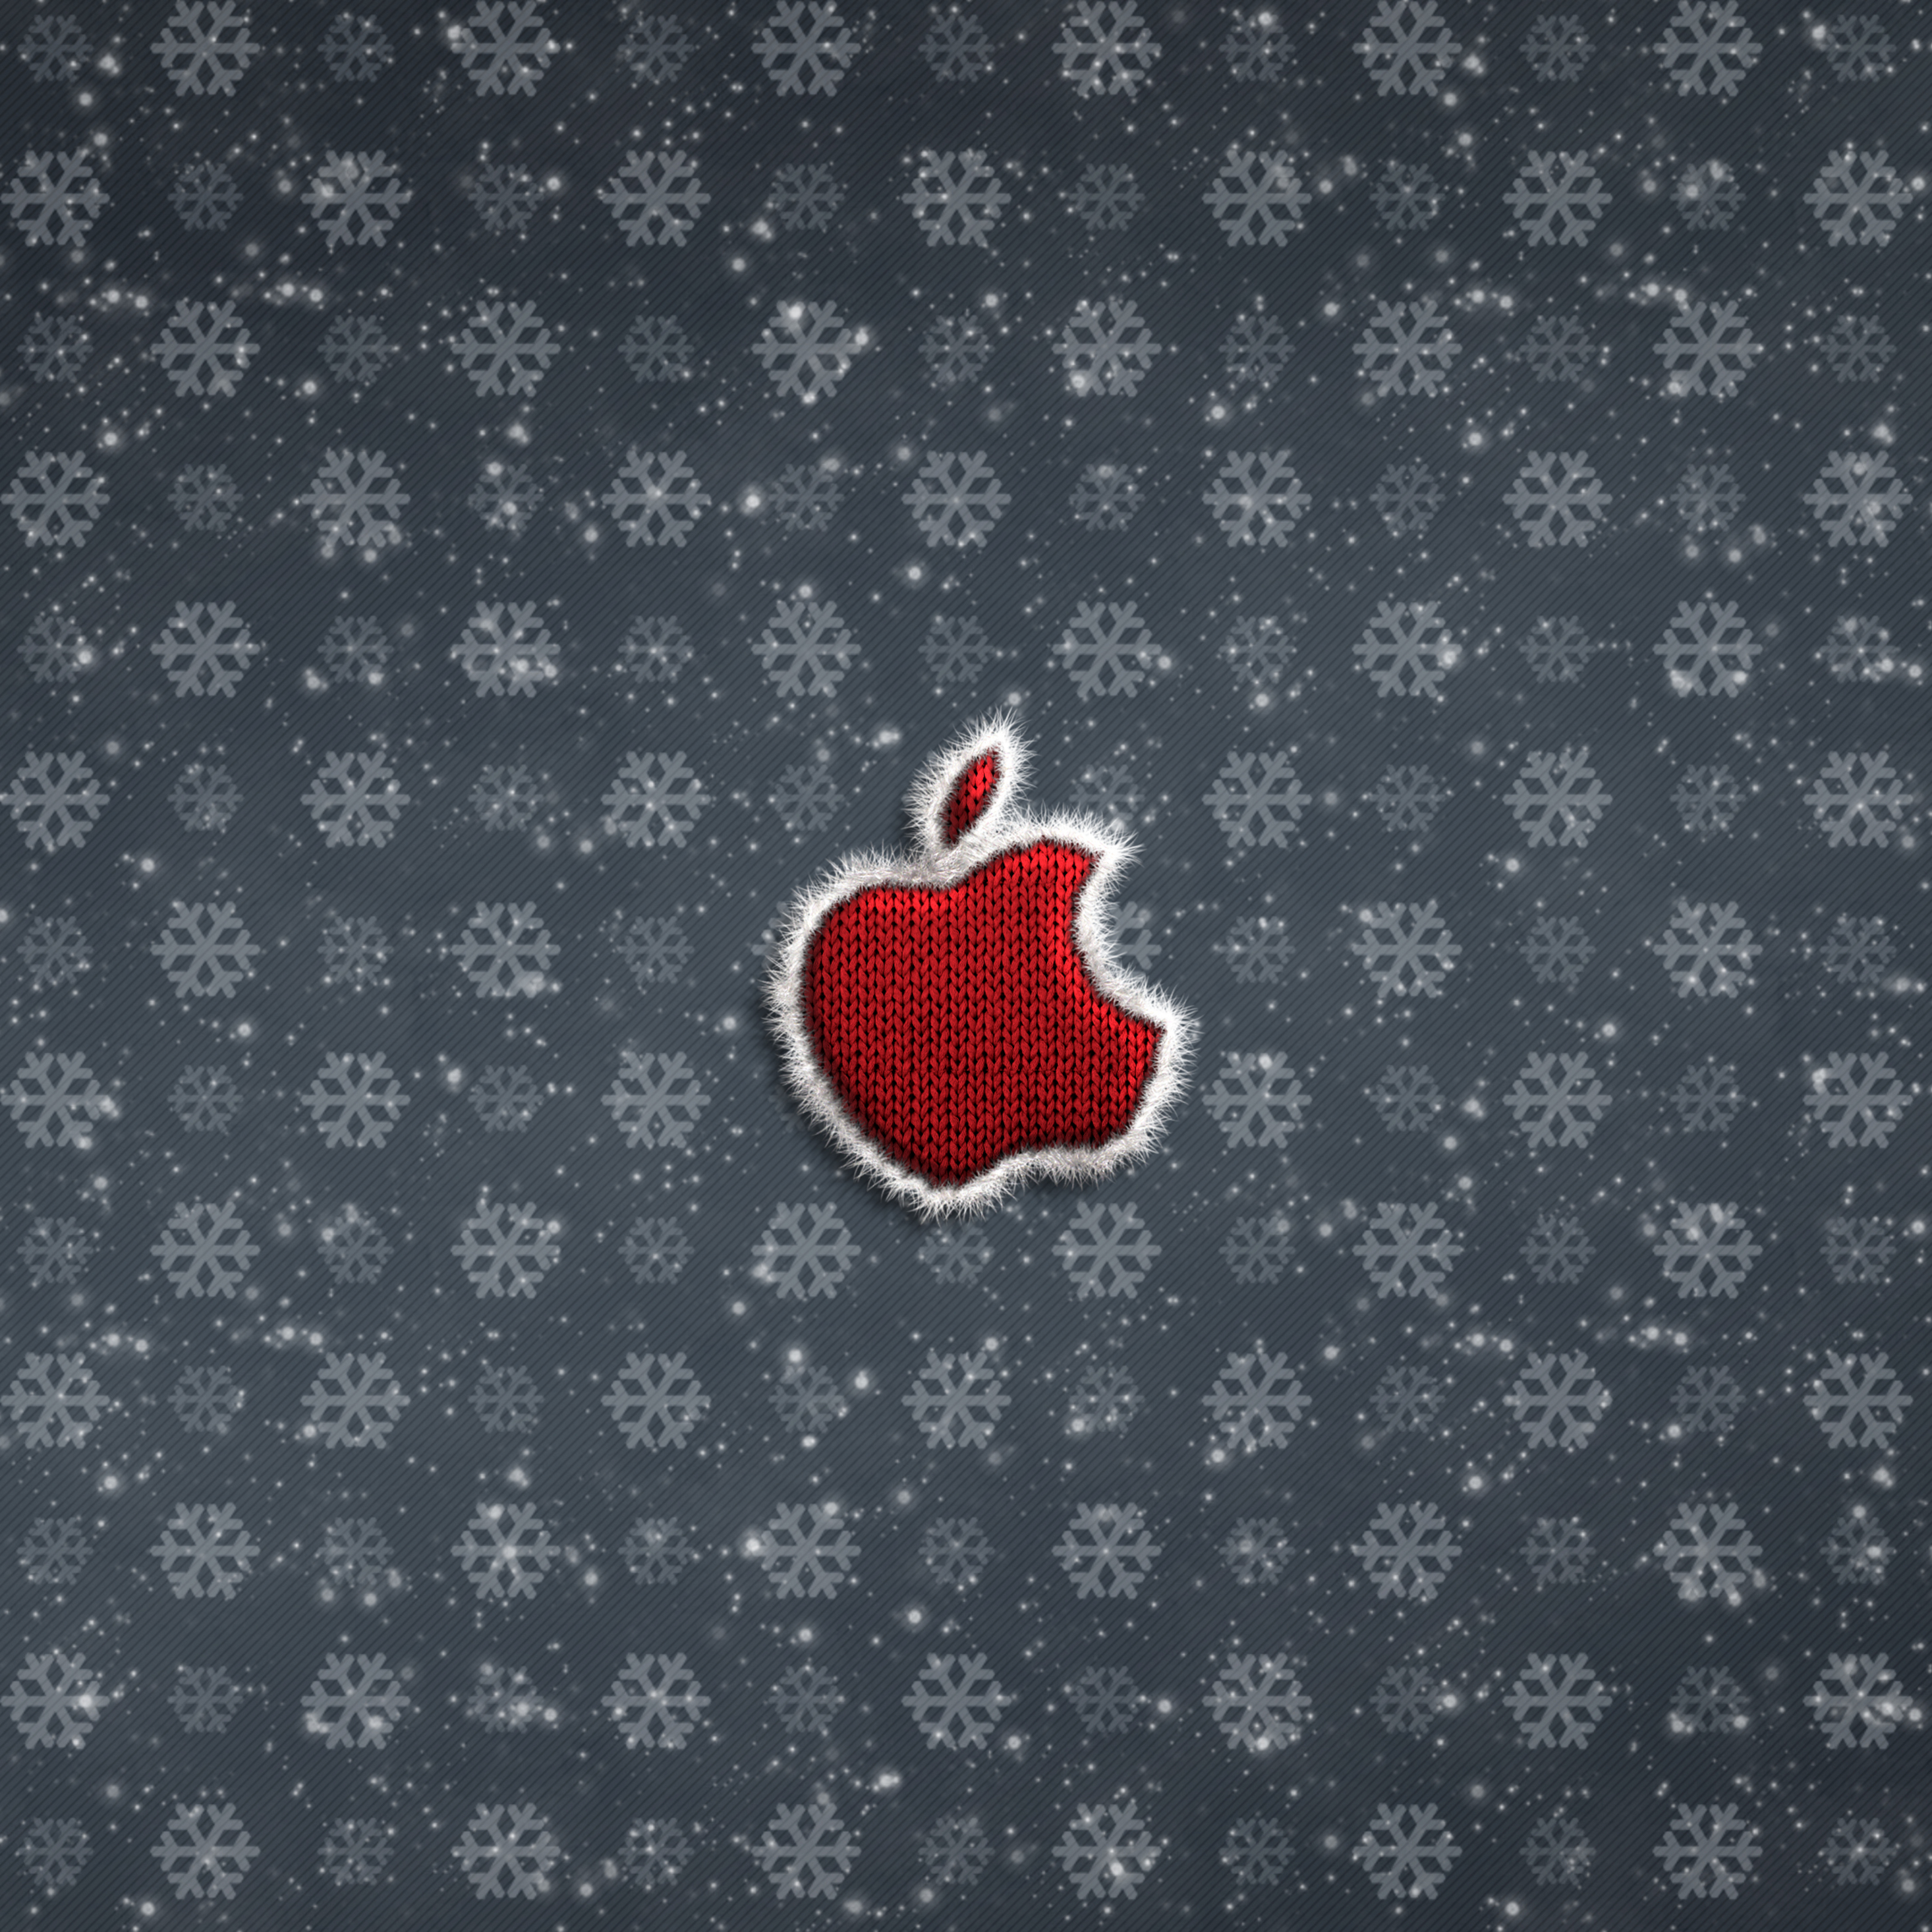 2932x2932 Apple Logo Christmas Celebrations 4k Ipad Pro Retina Display HD  4k Wallpapers, Images, Backgrounds, Photos and Pictures